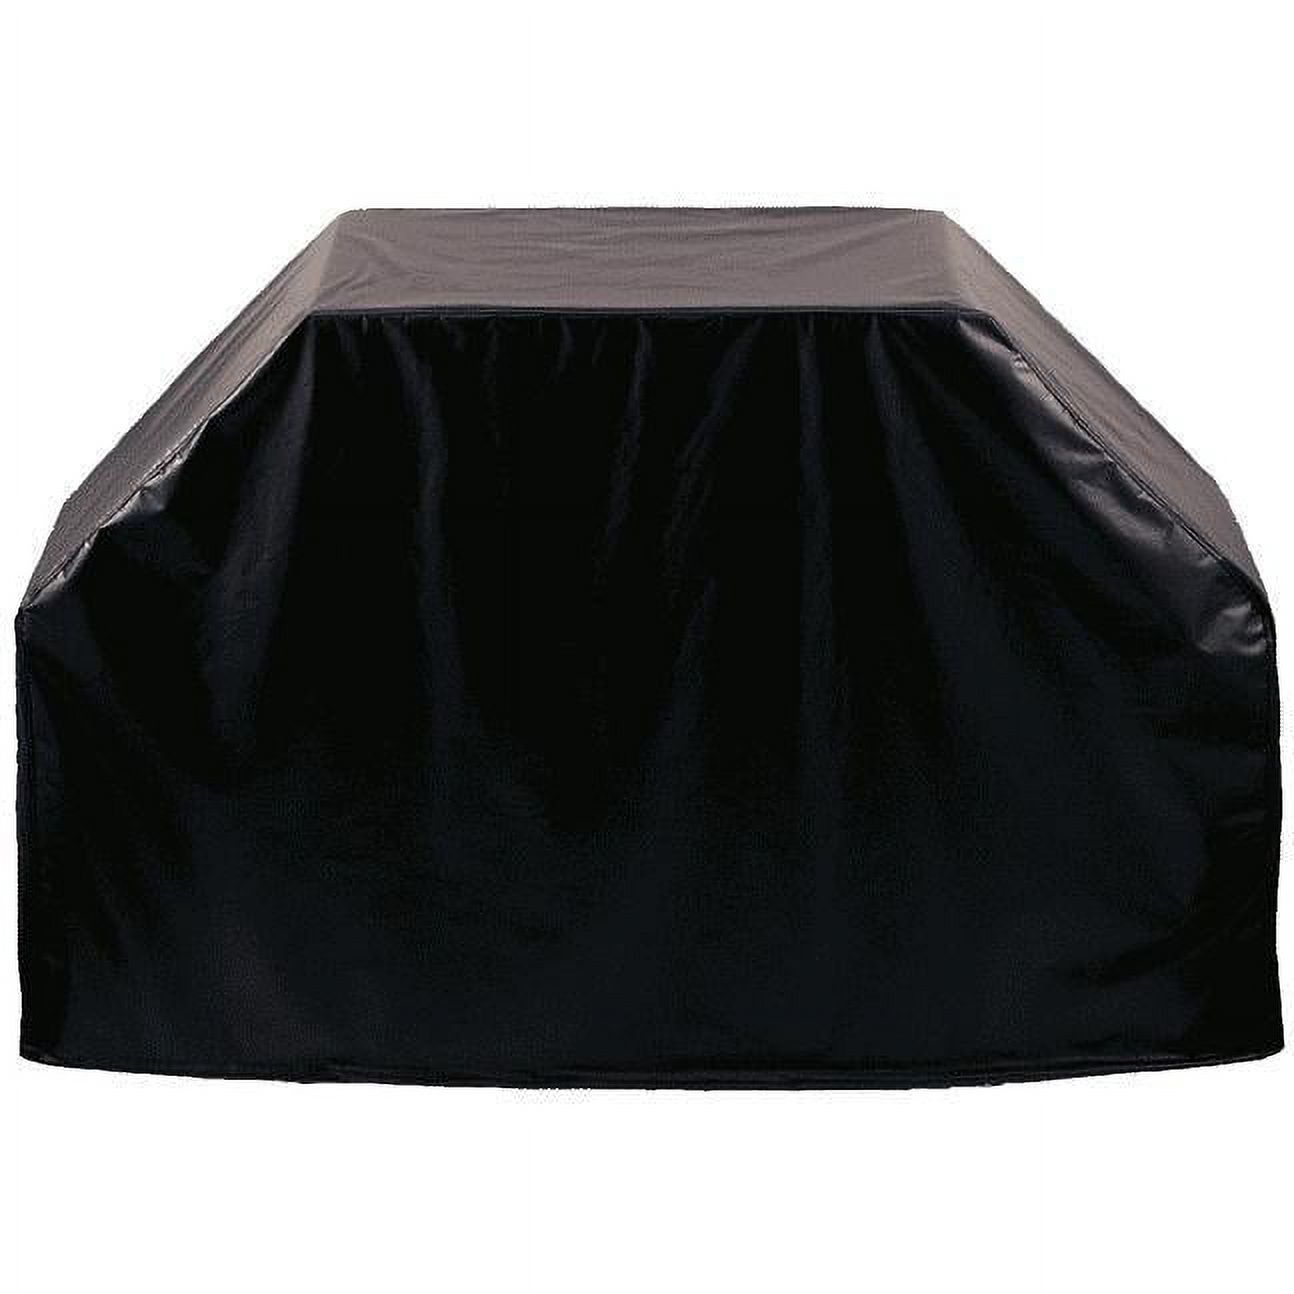 Blaze Grill Cover For Prelude LBM & Premium LTE 4-Burner Gas & Charcoal Freestanding Grills - 4CTCV - image 1 of 2